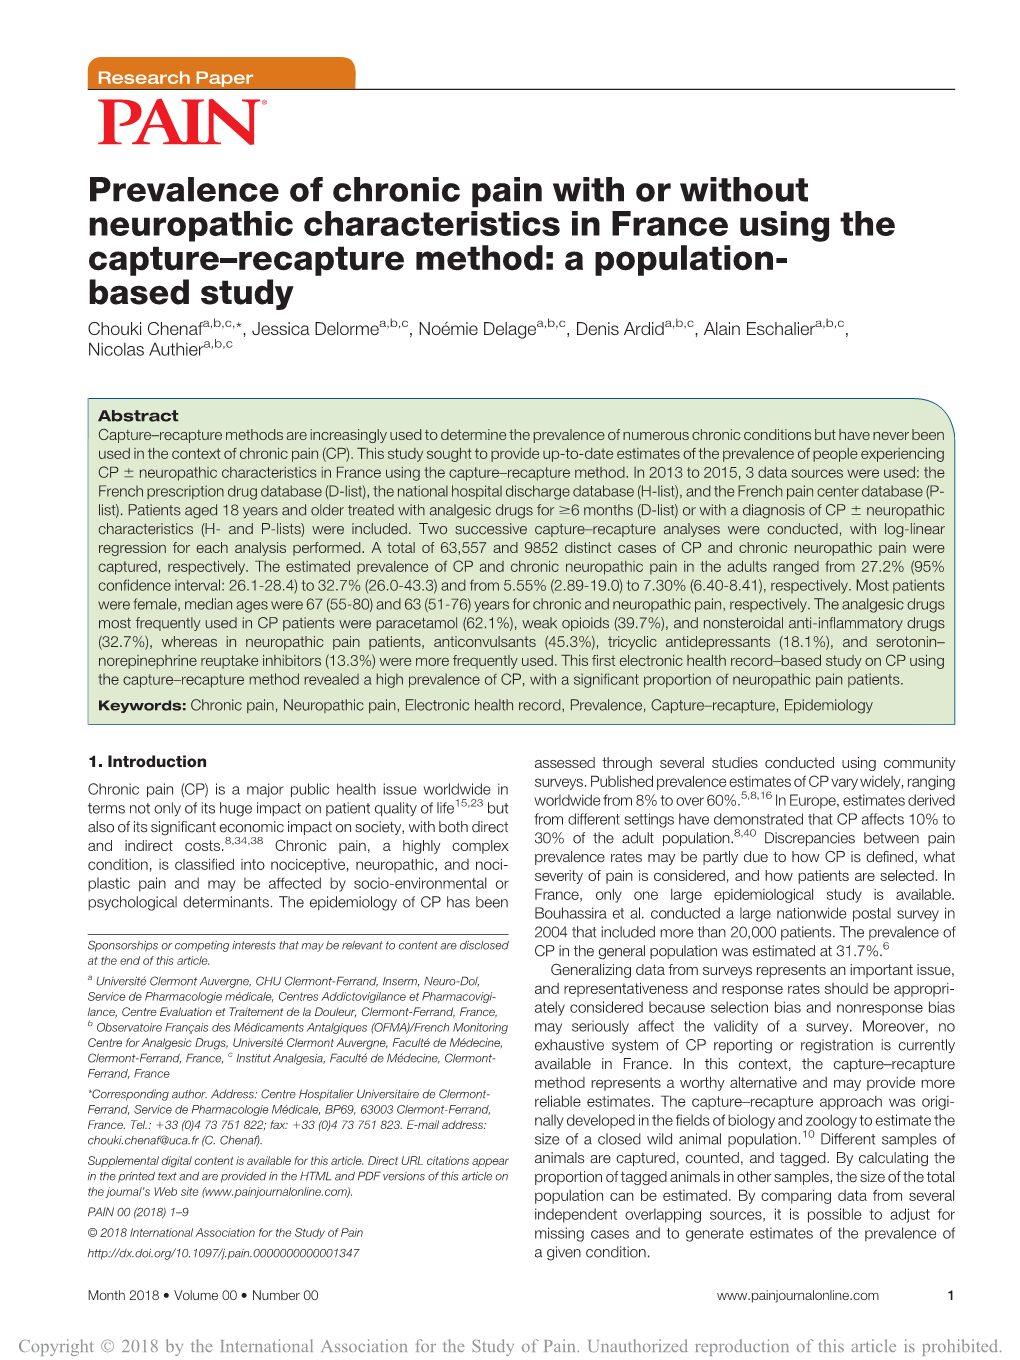 Prevalence of Chronic Pain with Or Without Neuropathic Characteristics